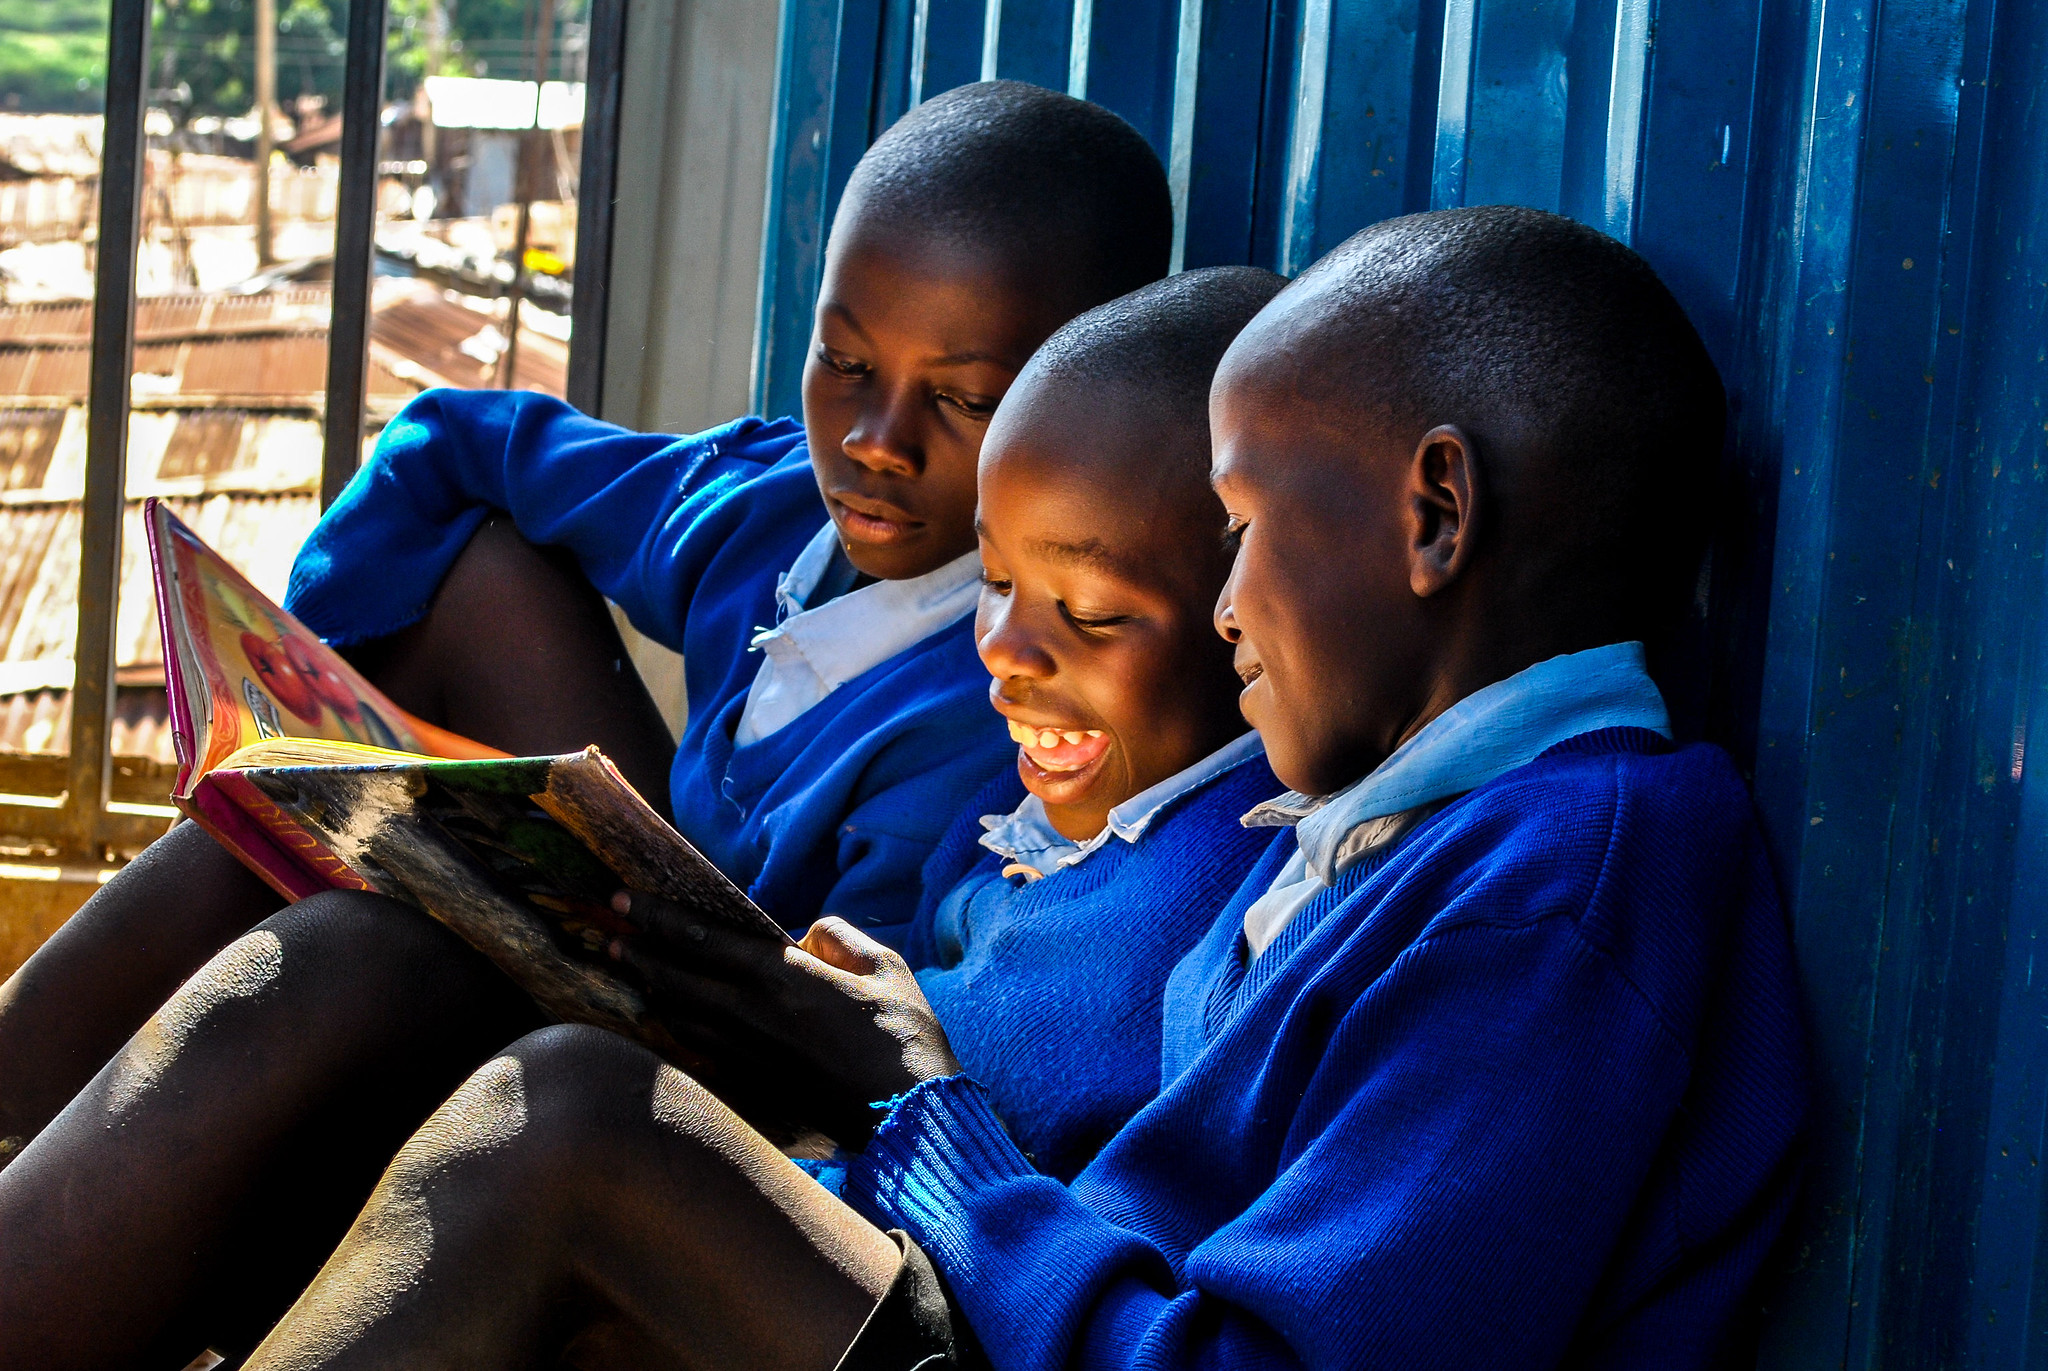 A new report series puts the spotlight on challenges and solutions for foundational learning in Africa